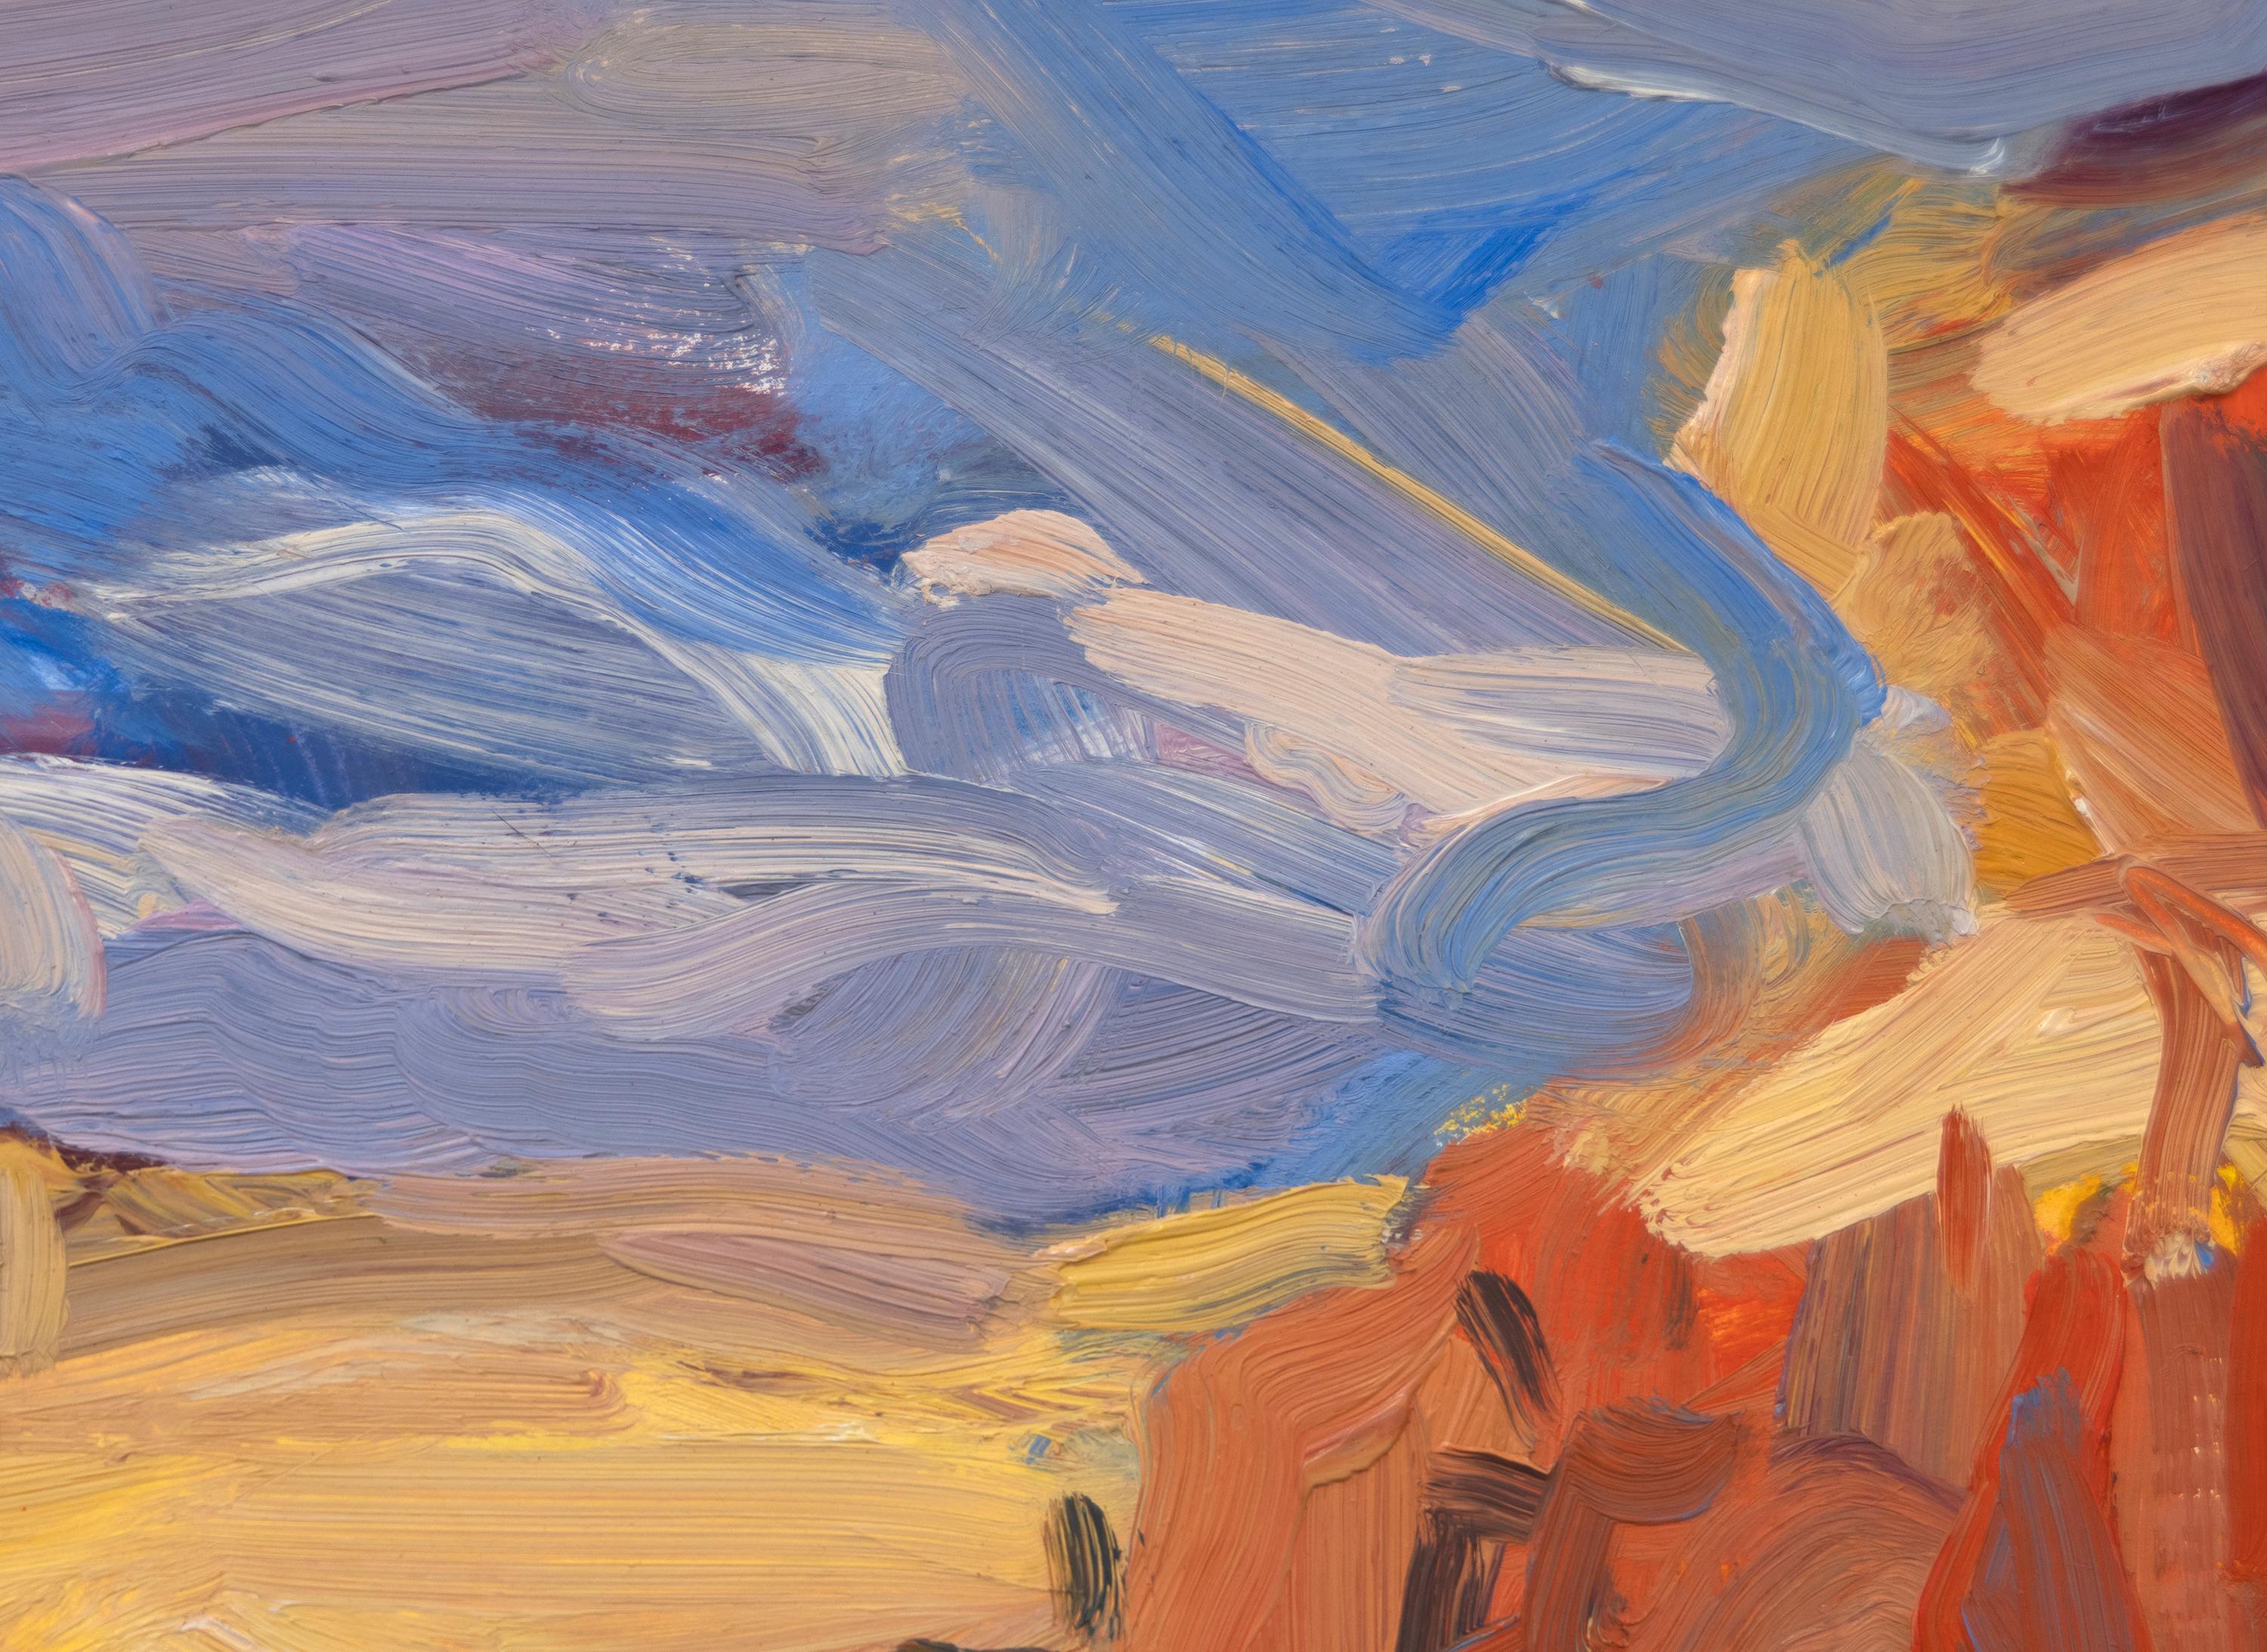 Evening Mesa and Rim - Contemporary Painting by Duncan Martin